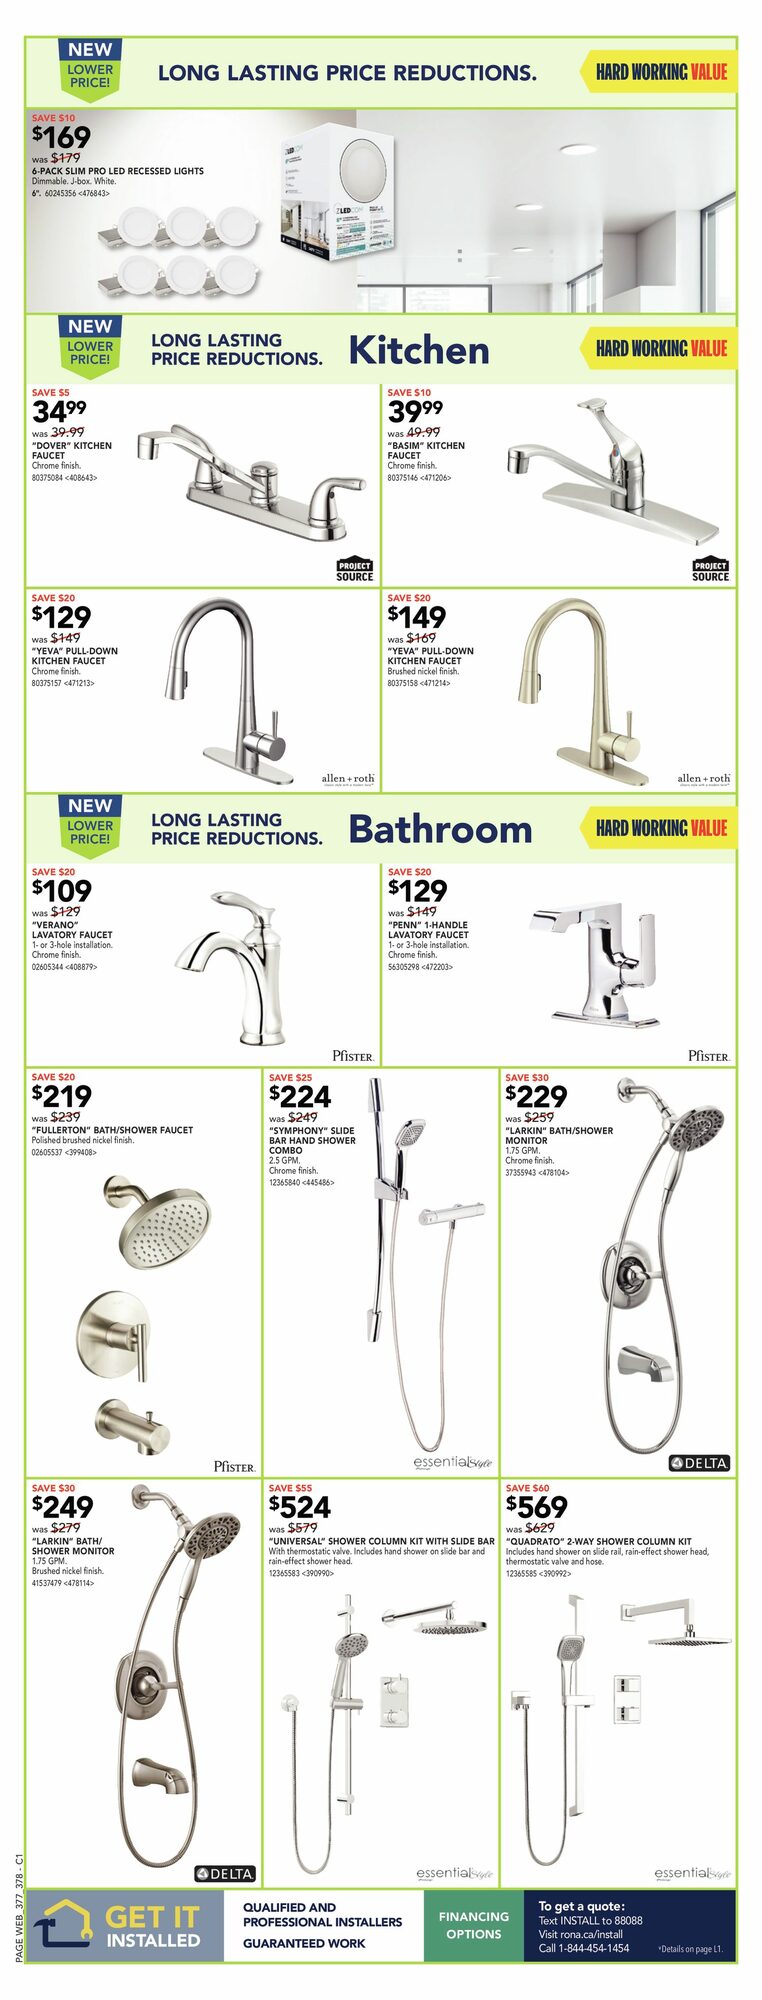 Rona - Weekly Flyer Specials - Page 7